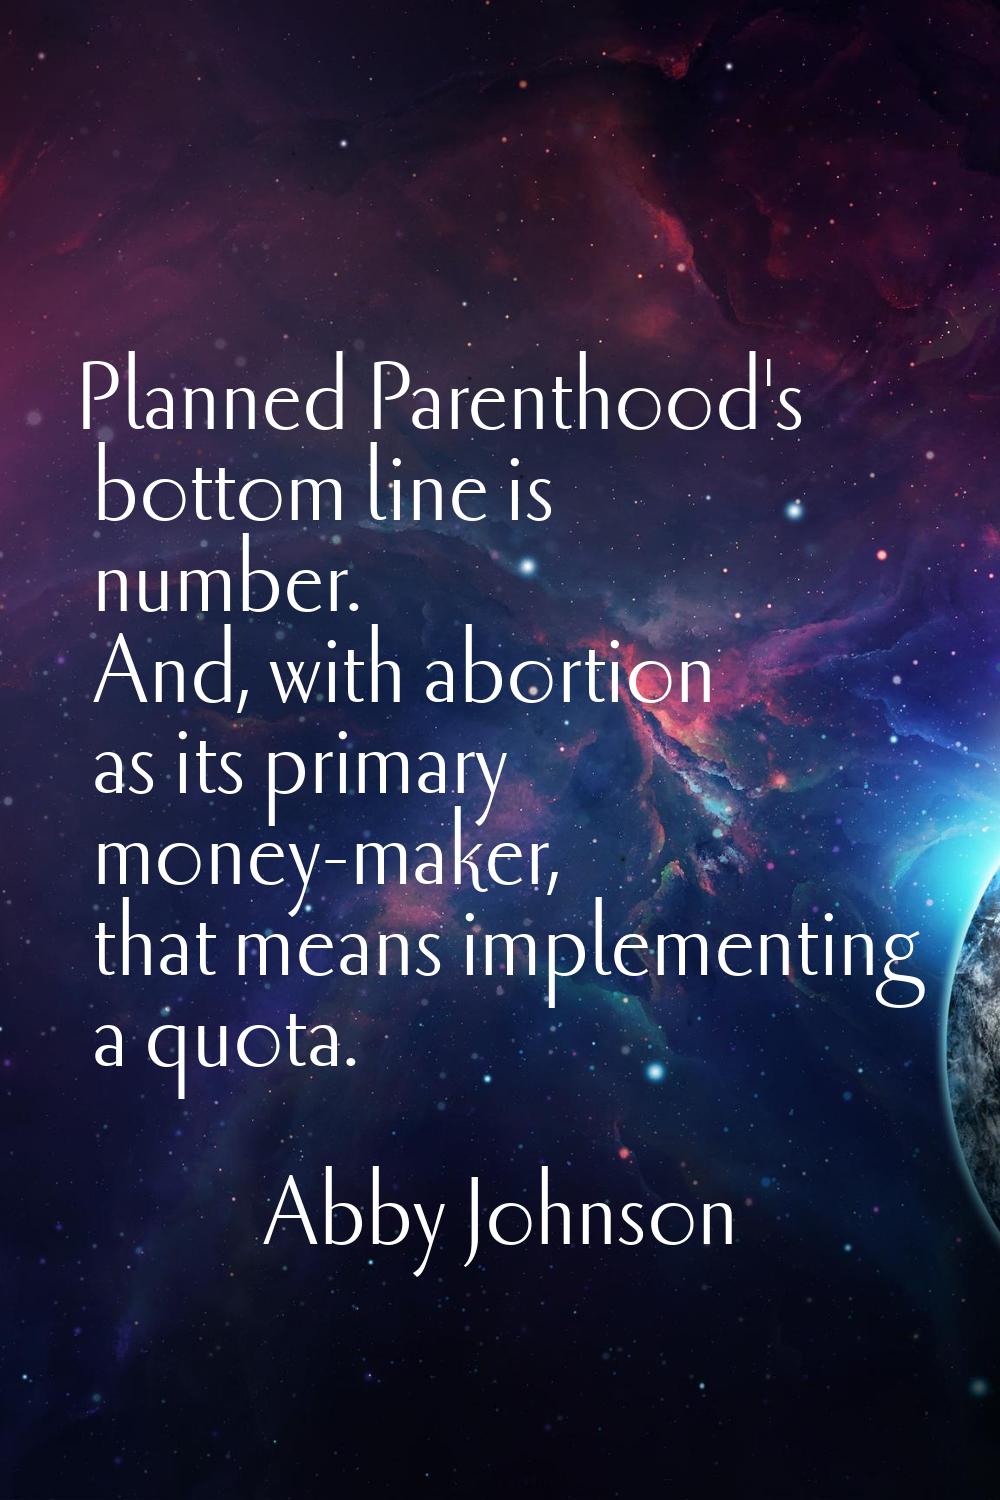 Planned Parenthood's bottom line is number. And, with abortion as its primary money-maker, that mea